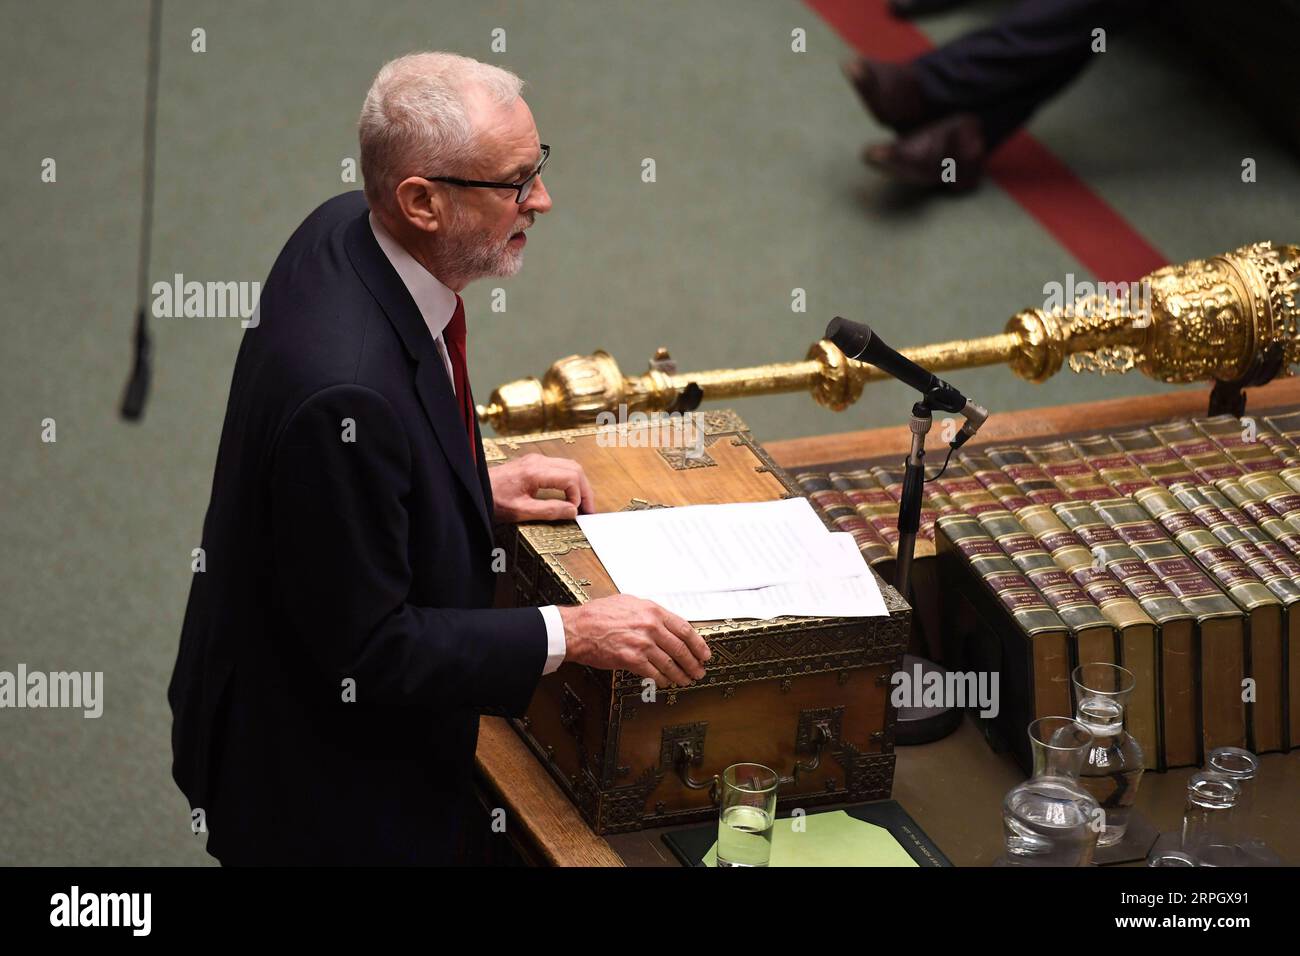 191023 -- LONDON, Oct. 23, 2019 Xinhua -- British Labour Party Leader Jeremy Corbyn attends the Prime Minister s Questions at the House of Commons in London, Britain, on Oct. 23, 2019. British Prime Minister Boris Johnson said Wednesday that he still wants Britain to leave the European Union EU on Oct. 31, despite losing a vital vote on Tuesday night that derailed his strategy. Jessica Taylor/UK Parliament/Handout via Xinhua HOC MANDATORY CREDIT: UK Parliament/Jessica Taylor BRITAIN-LONDON-PMQ PUBLICATIONxNOTxINxCHN Stock Photo